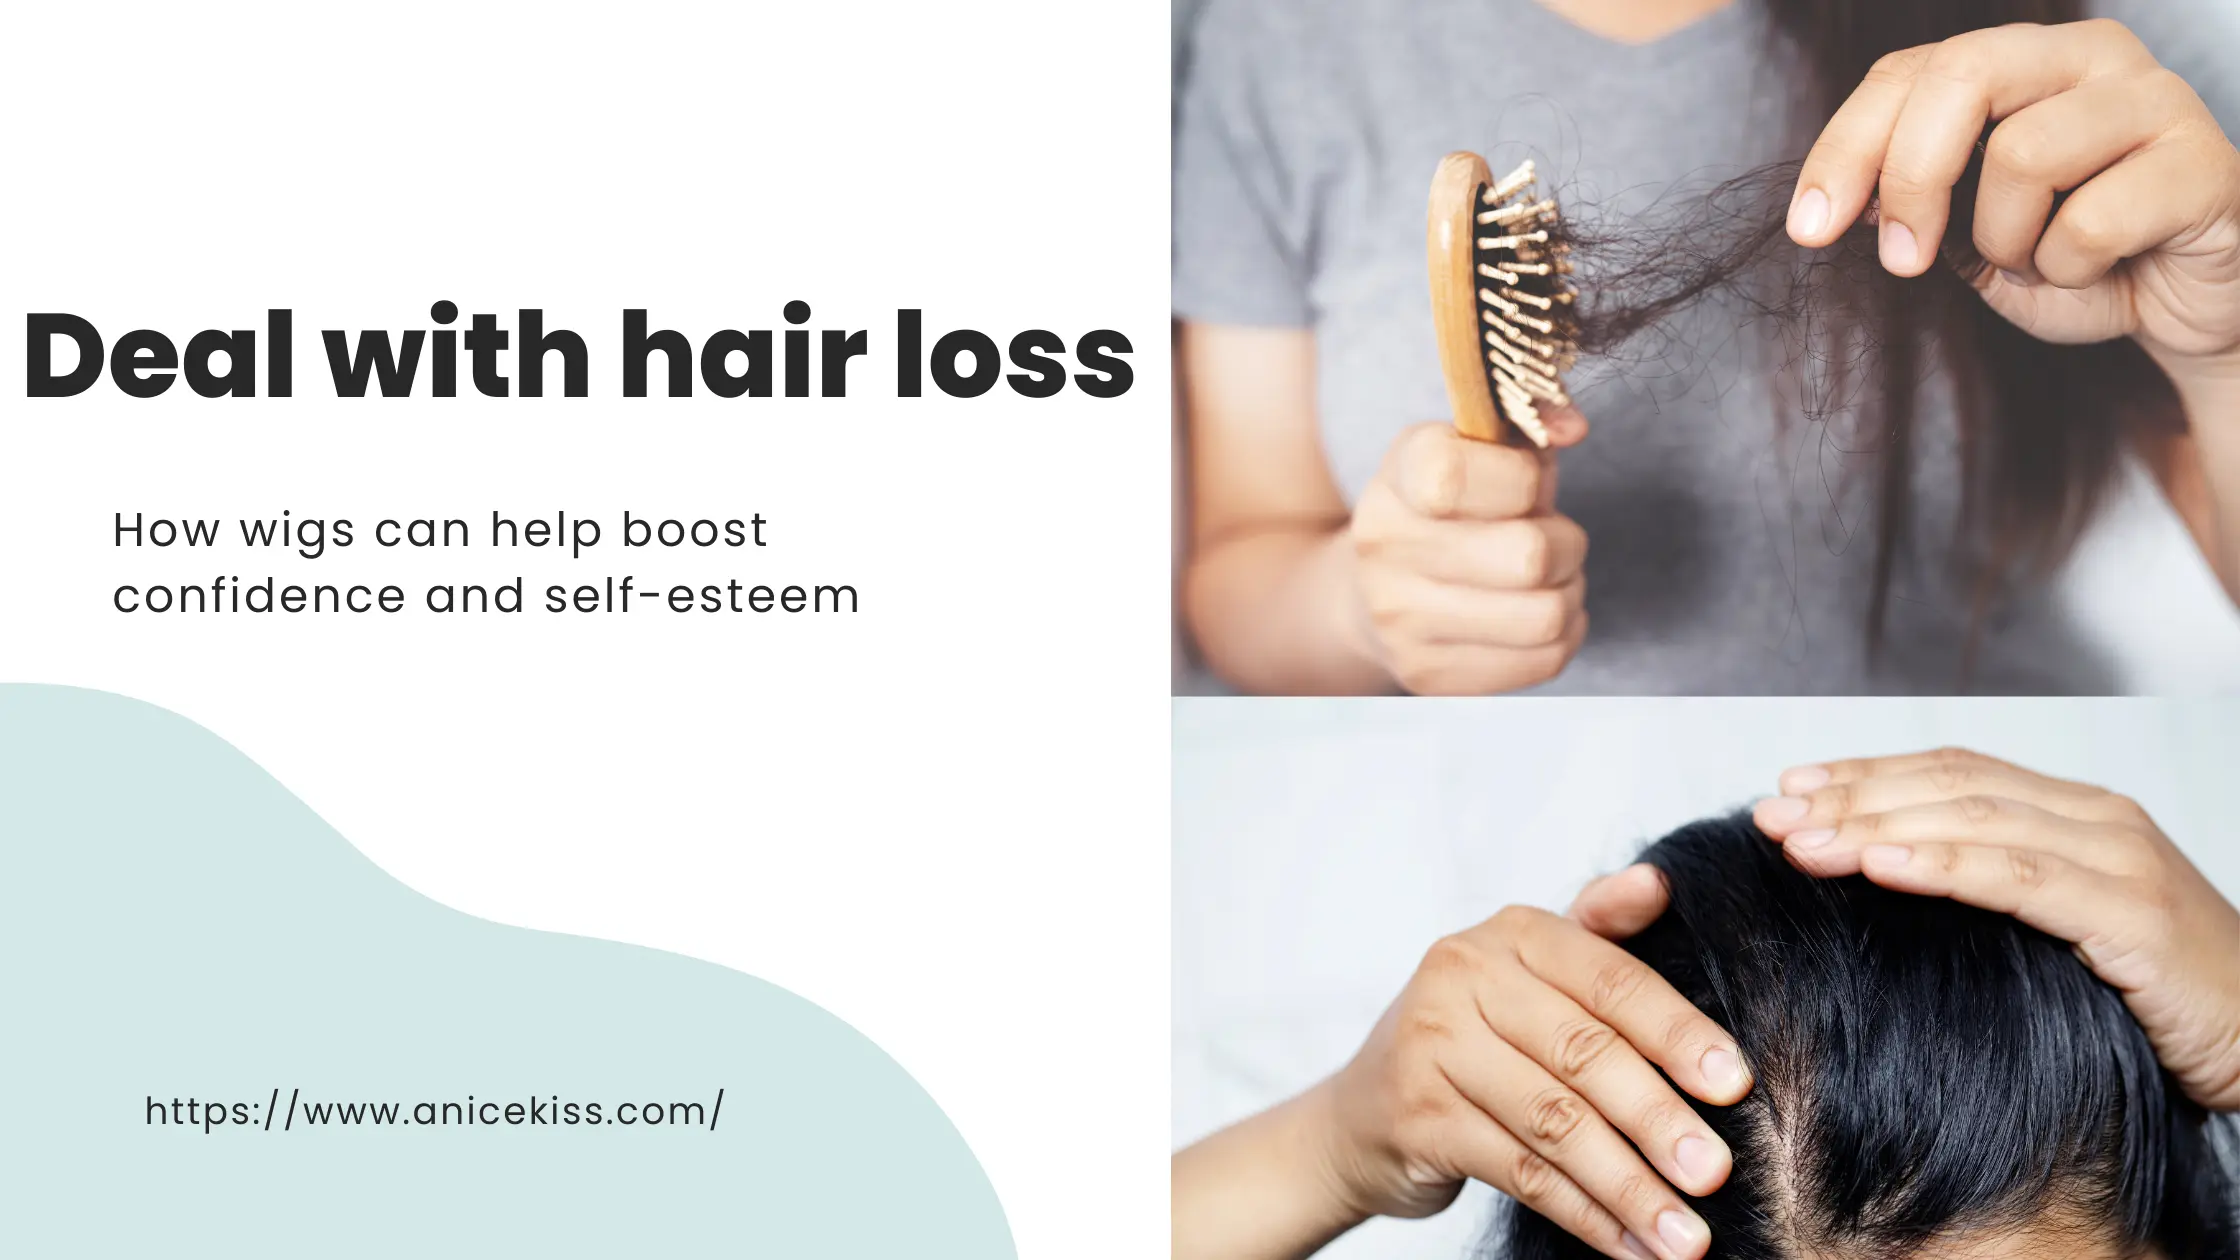 Dealing with hair loss: how wigs can help boost confidence and self-esteem